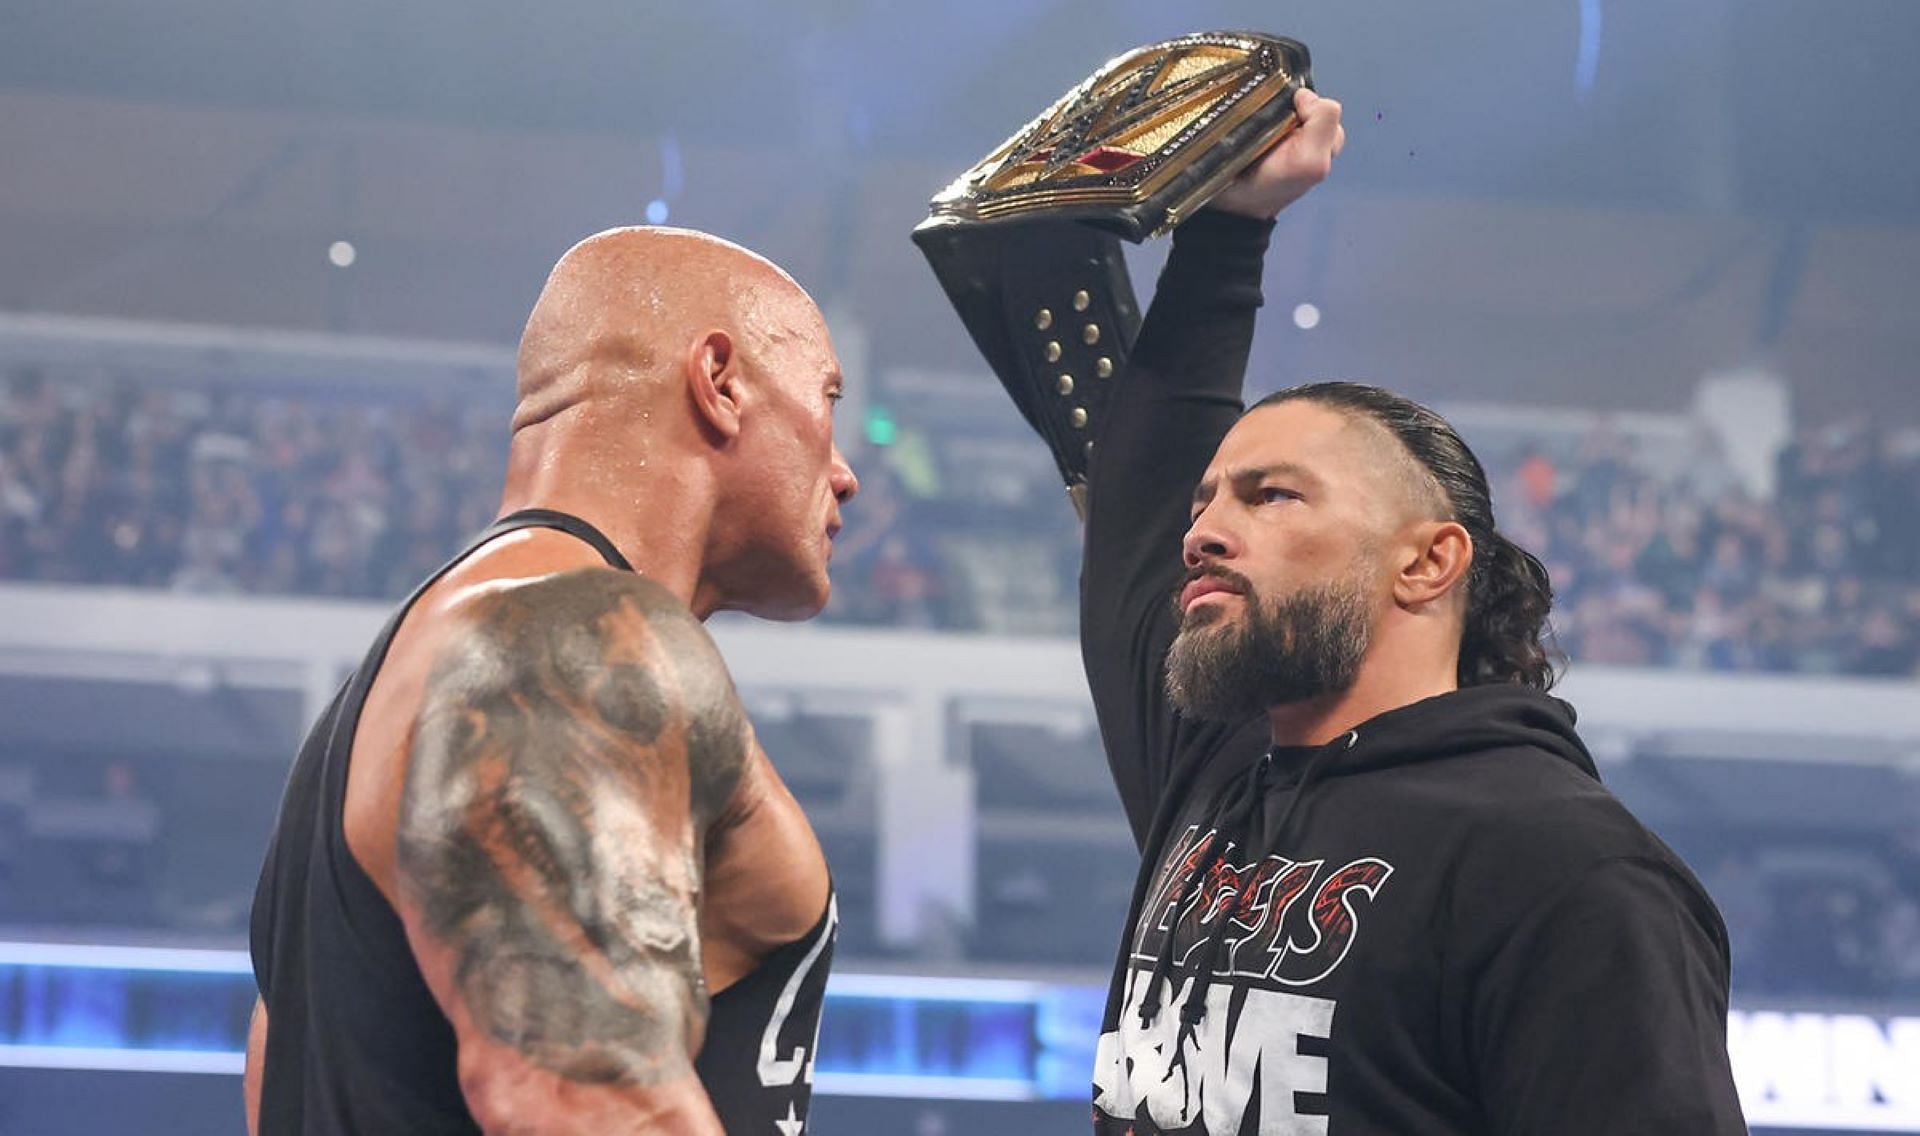 The showdown between Roman Reigns and The Rock is on the horizon.